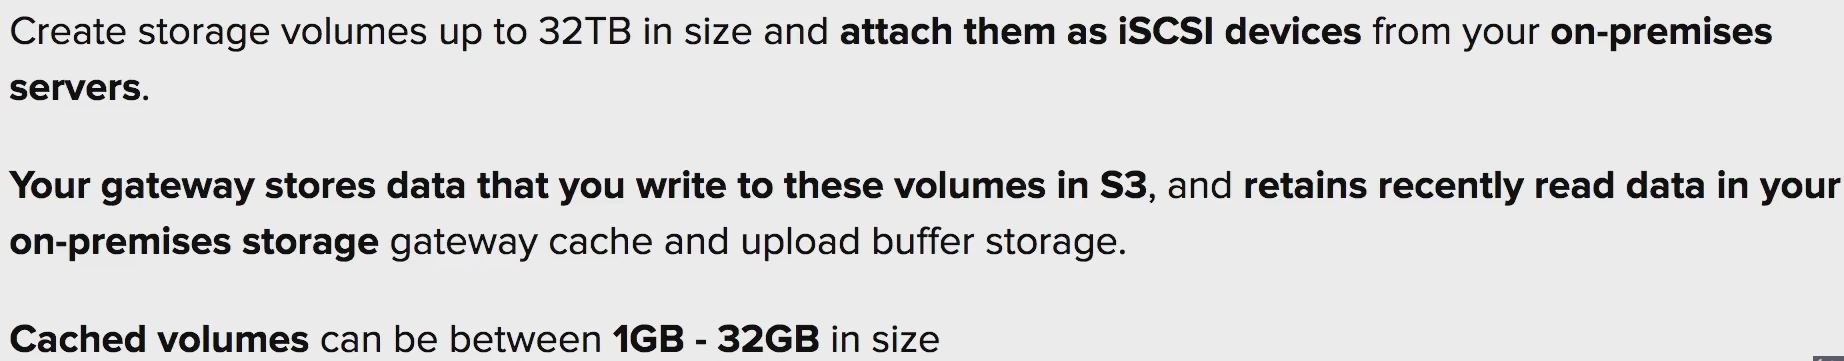 /img/AWS/Storage/Untitled%2024.png